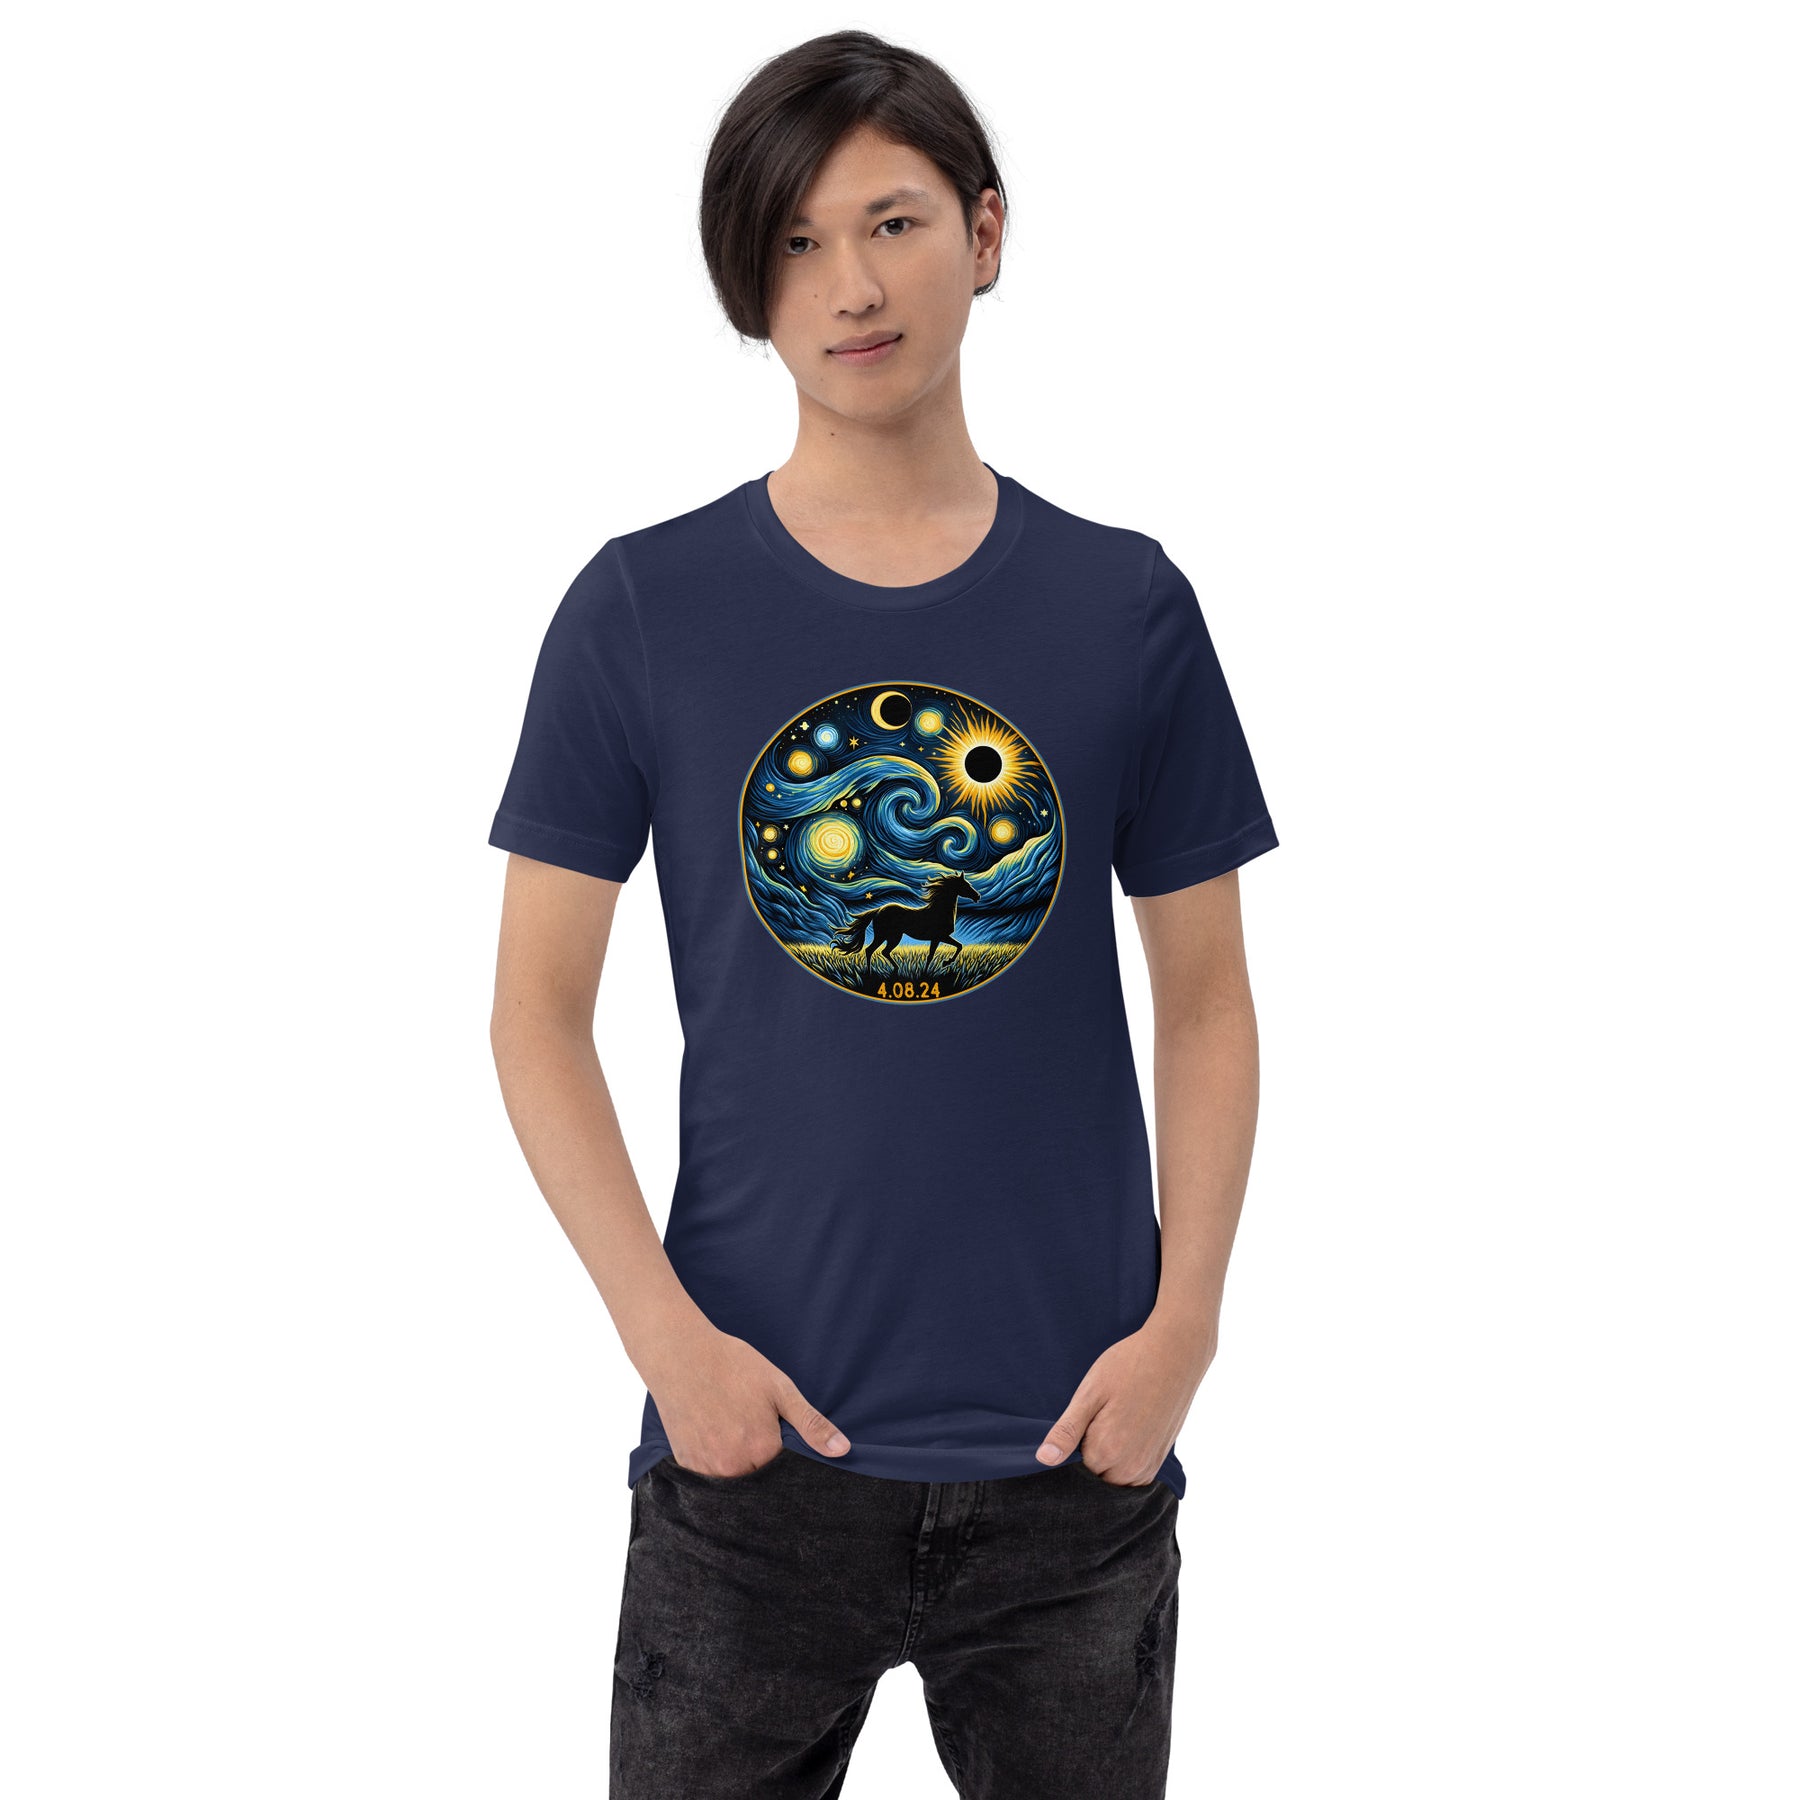 Horse Total Solar Eclipse Shirt, April 8 2024, Horse Lover Tee, Eclipse Viewing & Astronomy Gift, Van Gogh Art Style